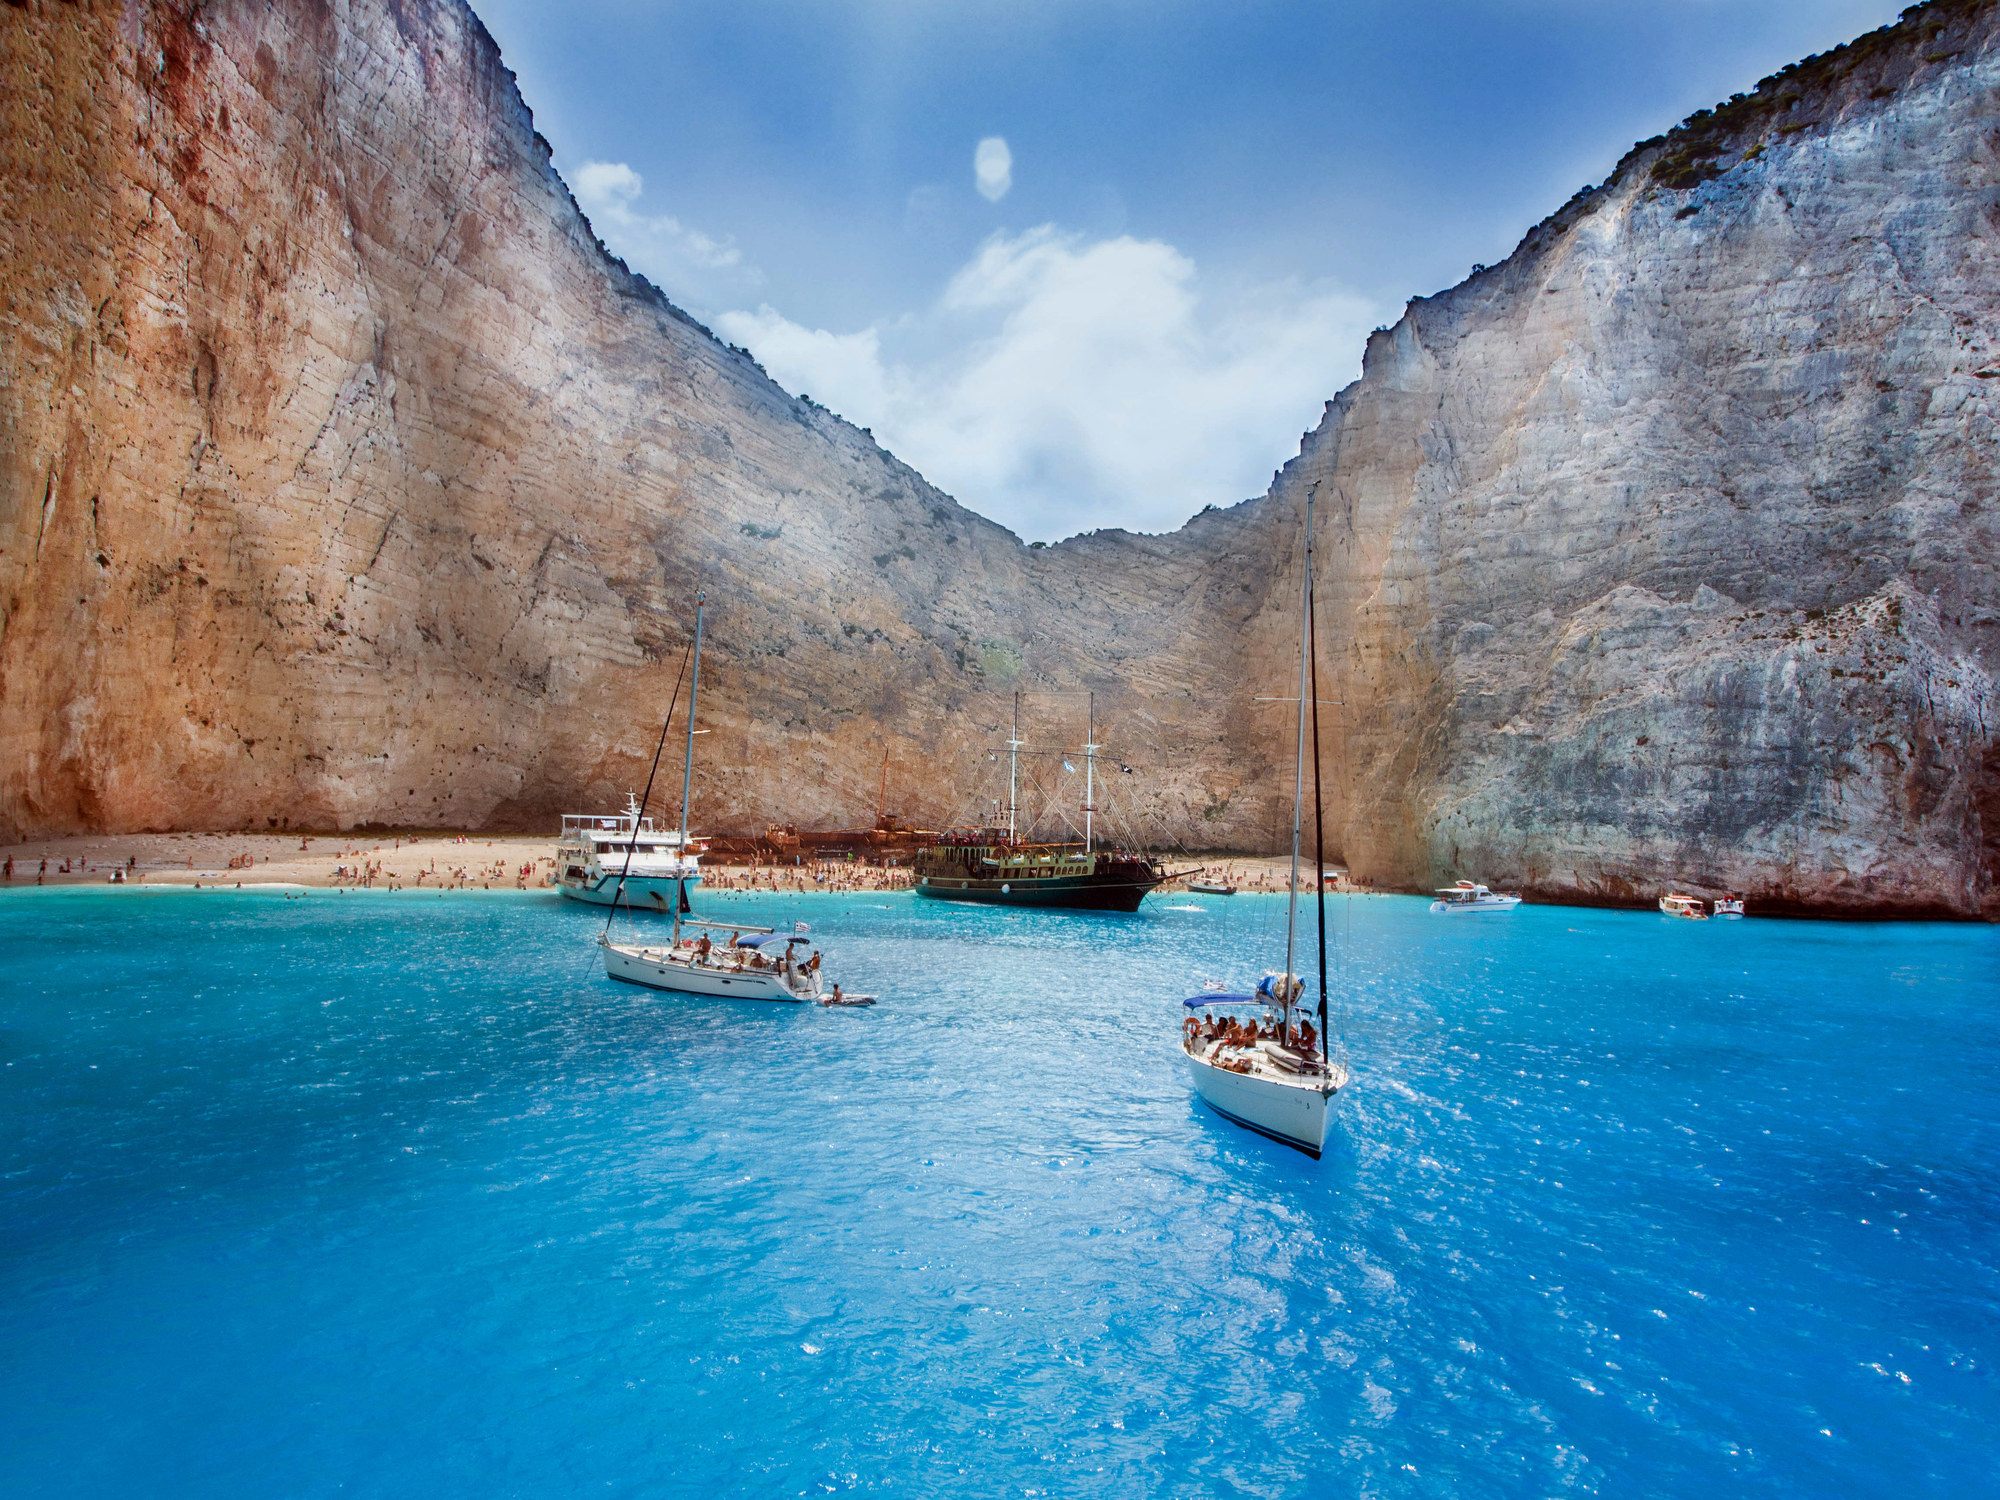 Boats in a cove in Greece